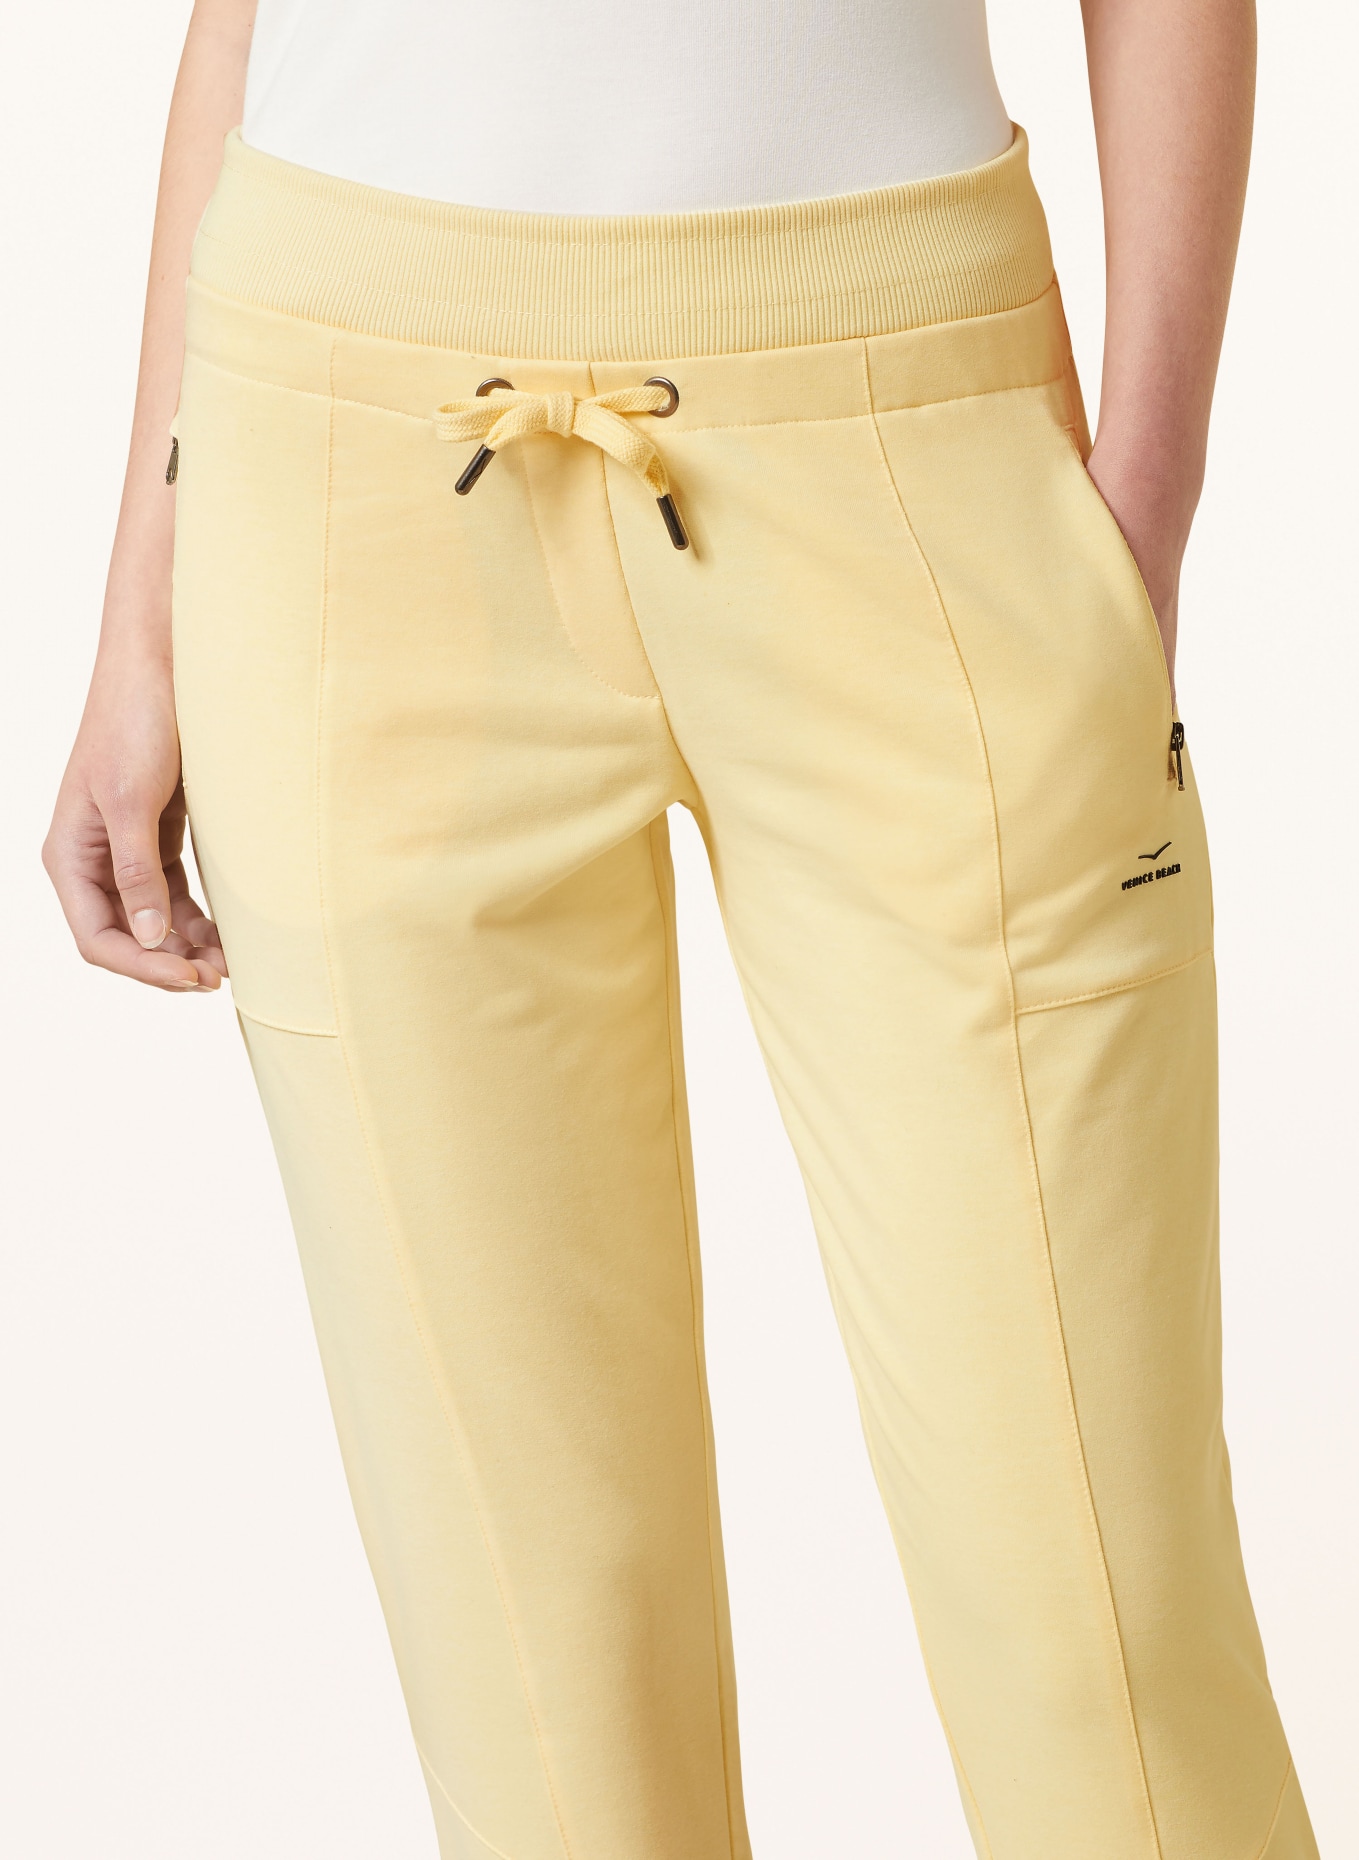 VENICE BEACH Training pants VB Isabelle, Color: LIGHT YELLOW (Image 5)